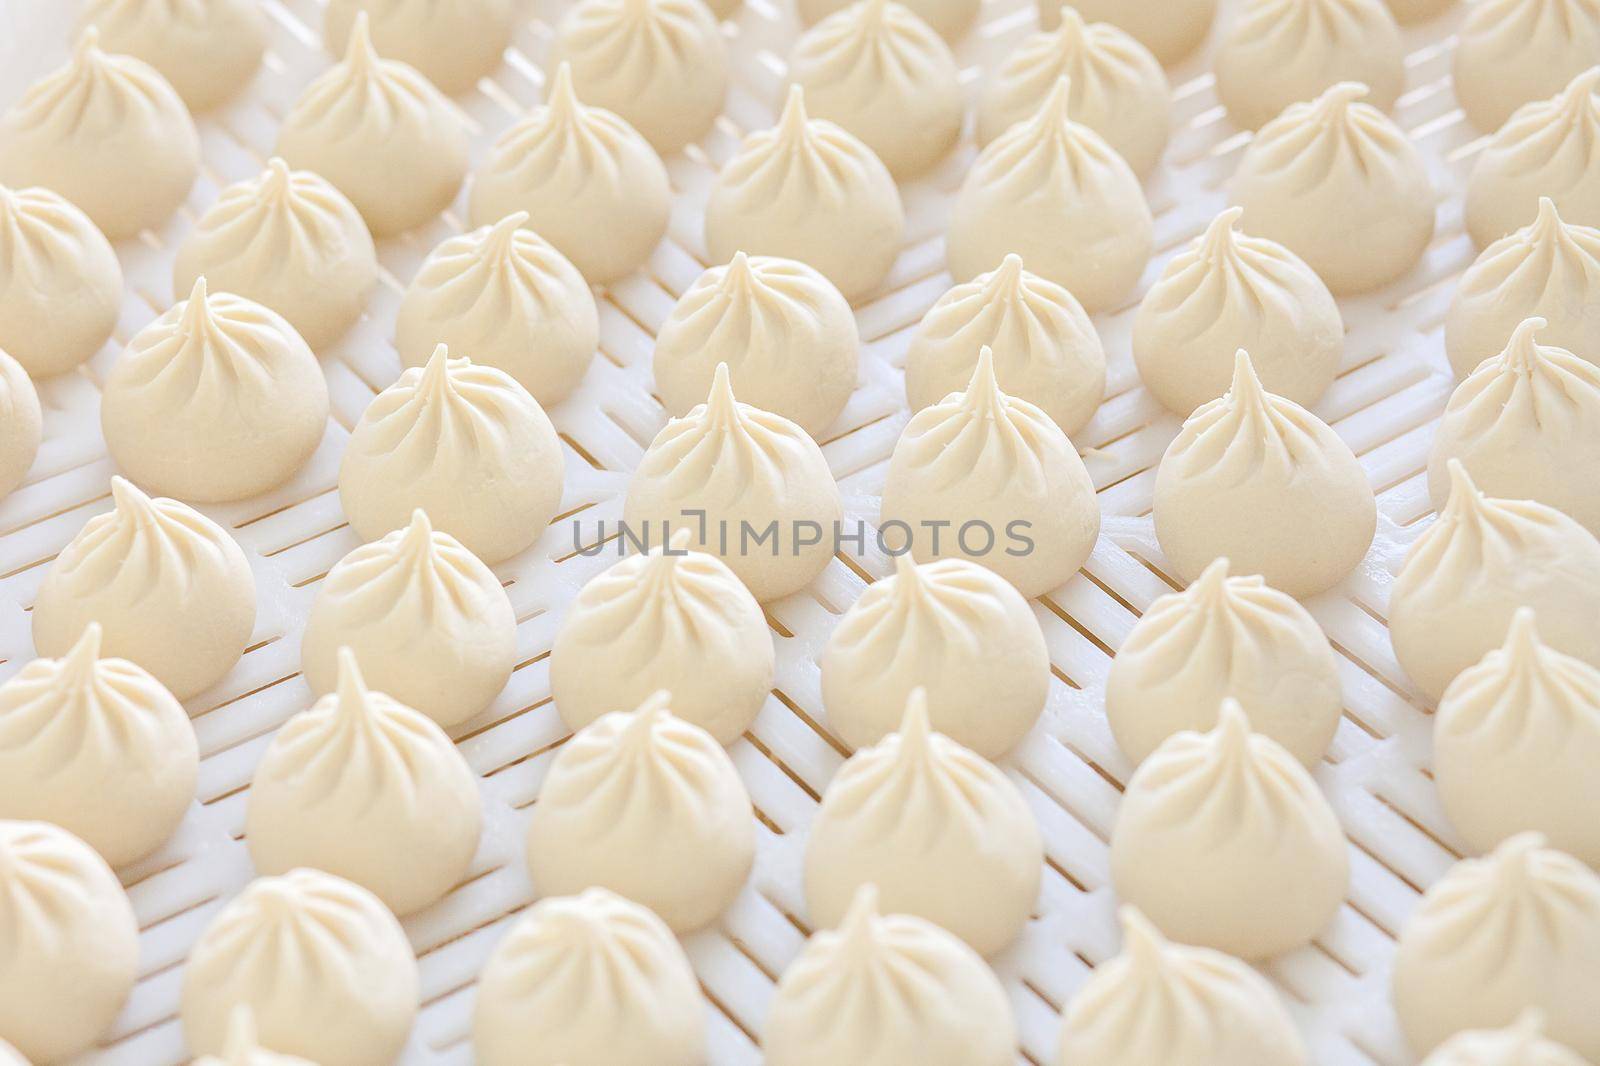 Frozen semi-finished products, khinkali at the factory by StudioPeace